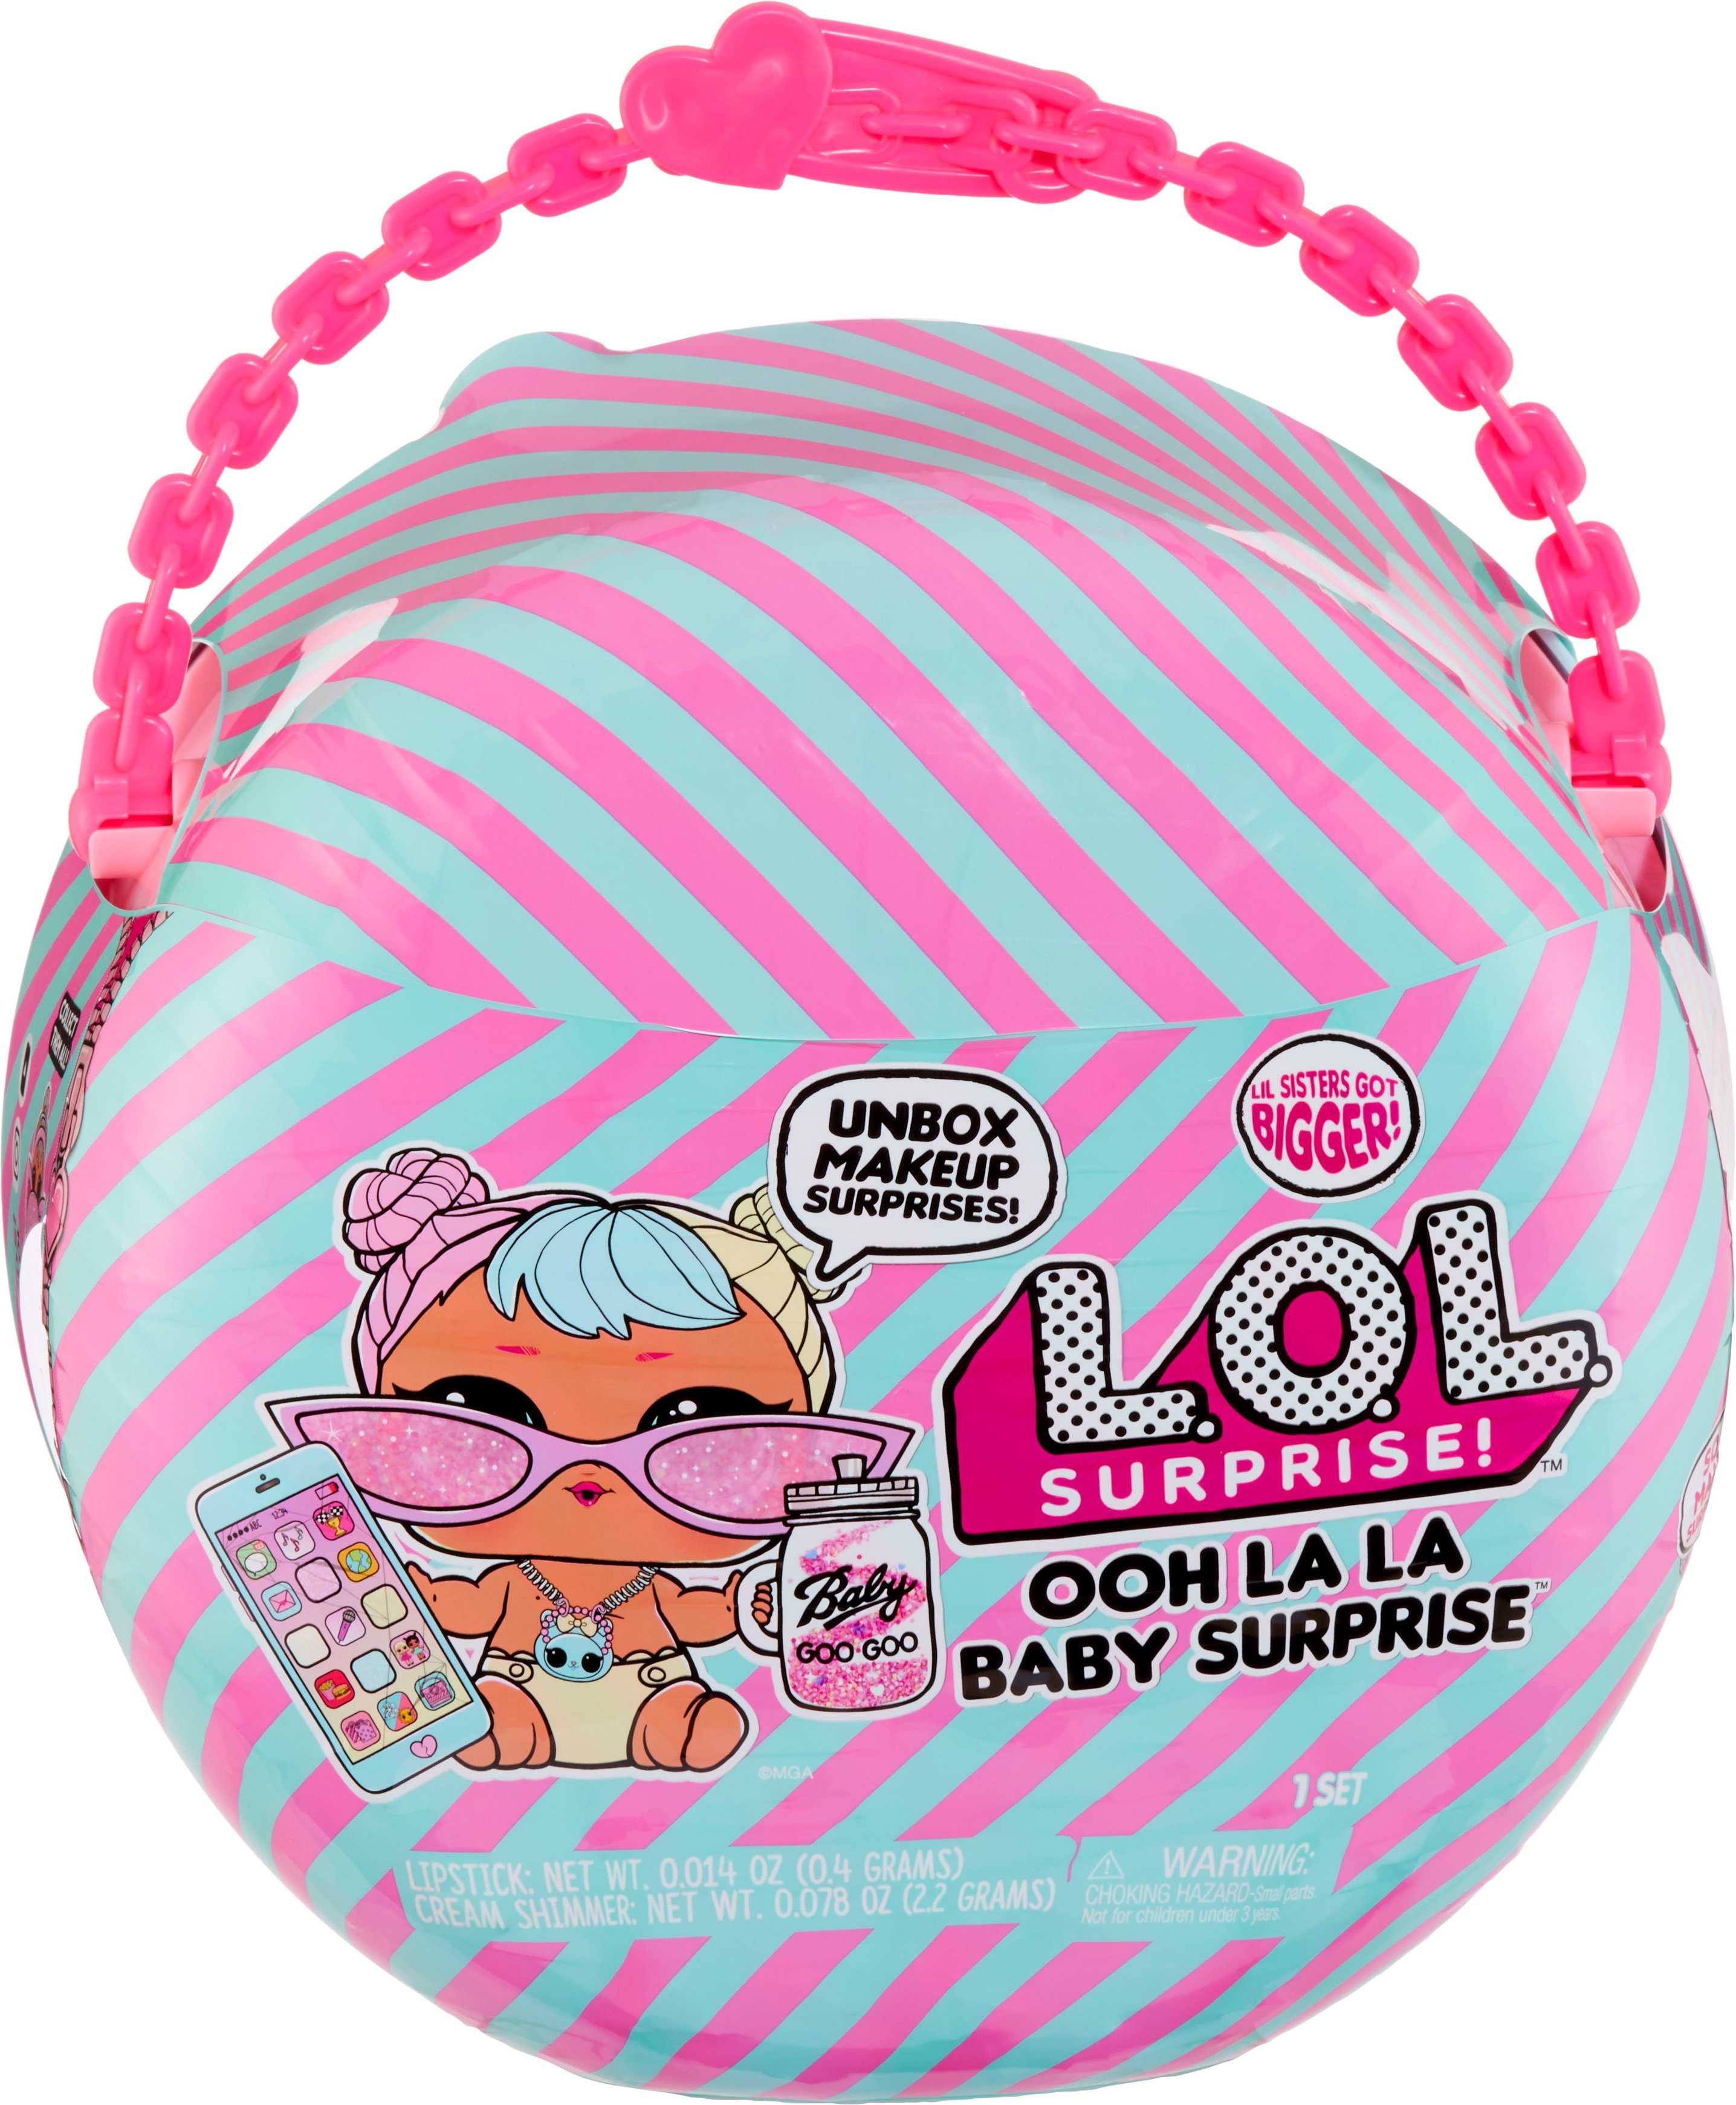 Everything You'll Find Inside the L.O.L. Surprise Big Surprise